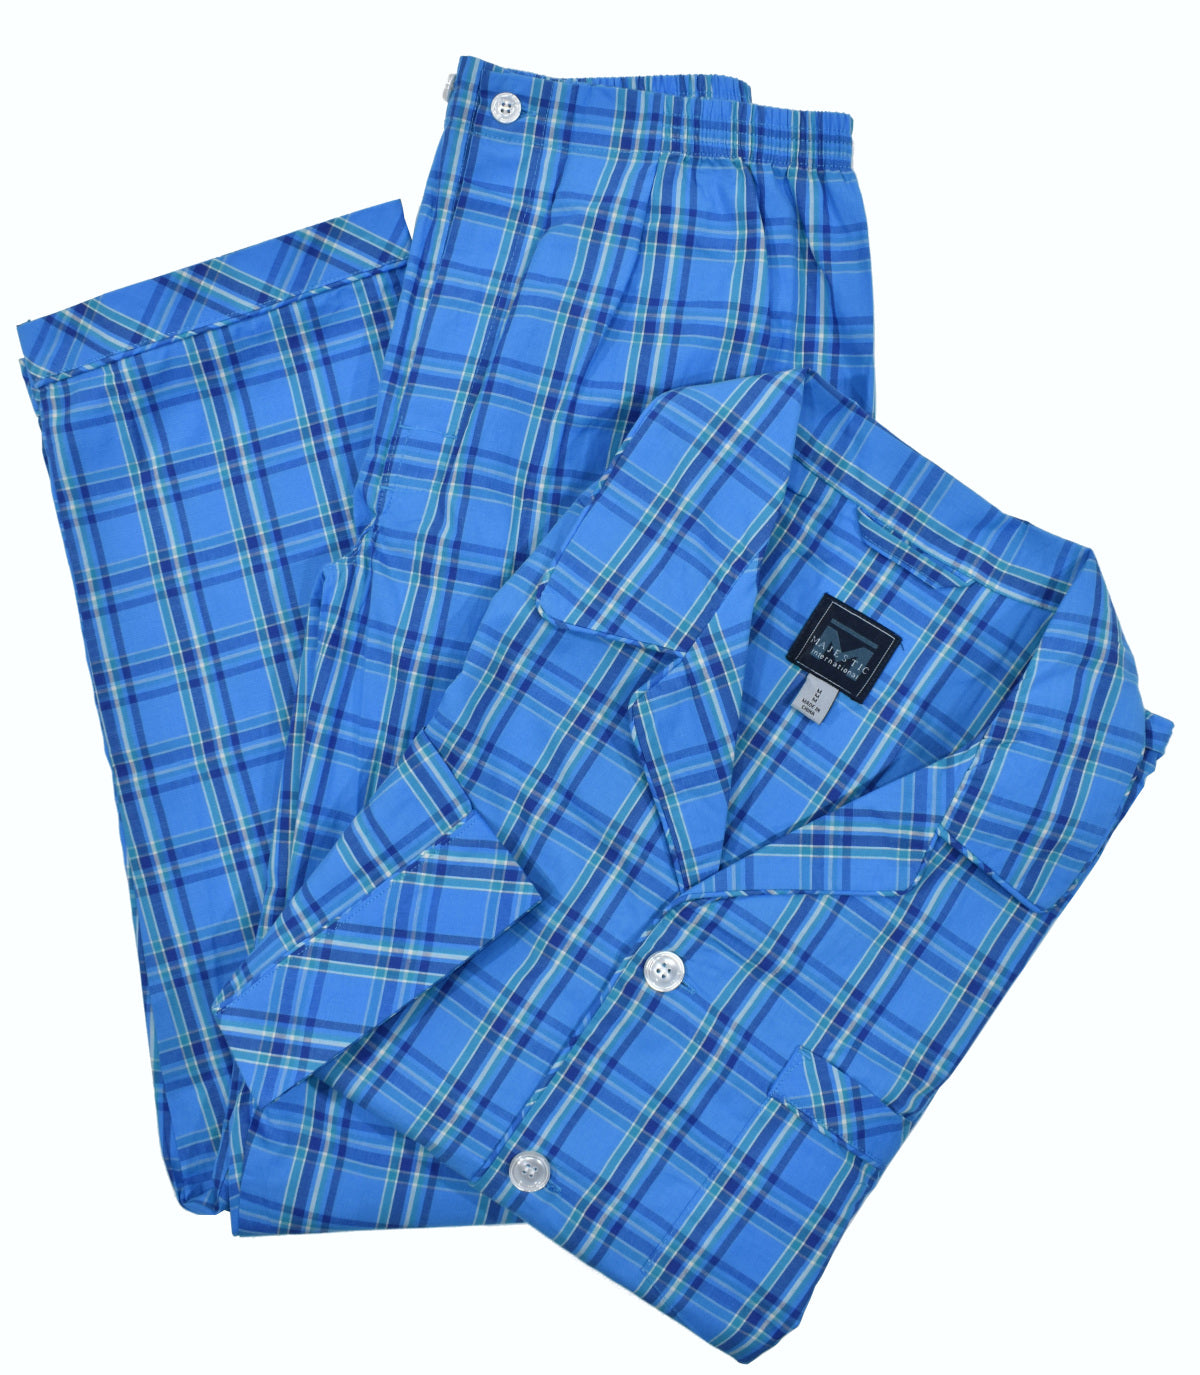 Classic cotton plaid pajamas with a button front coat top, edge piping and a chest pocket.   Pants feature a draw string waist, functional fly and 3/4 waist band stretch for enhanced comfort.   Soft Spring/Summer blue coloration.  Classic fit.